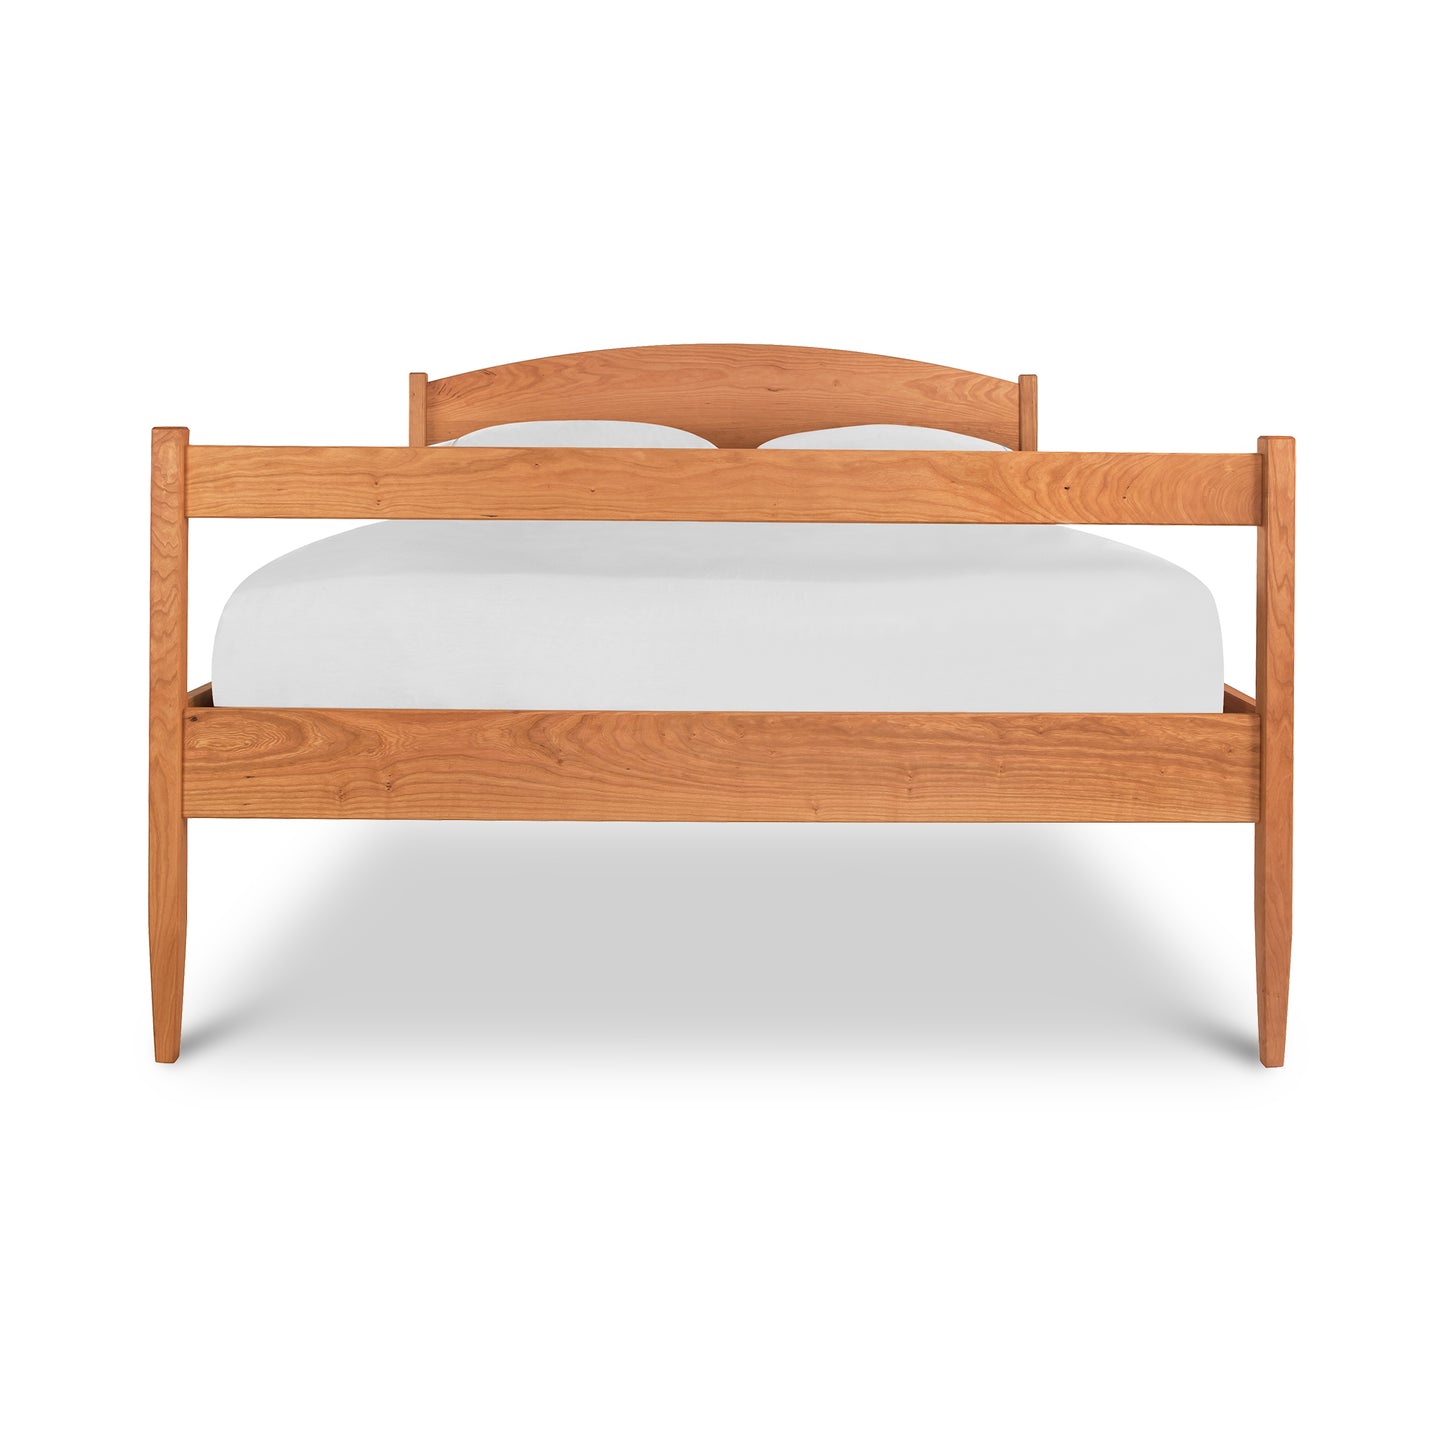 A simple Maple Corner Woodworks Vermont Shaker Bed frame with a curved headboard, underbed storage units, and a plain white mattress, isolated on a white background.